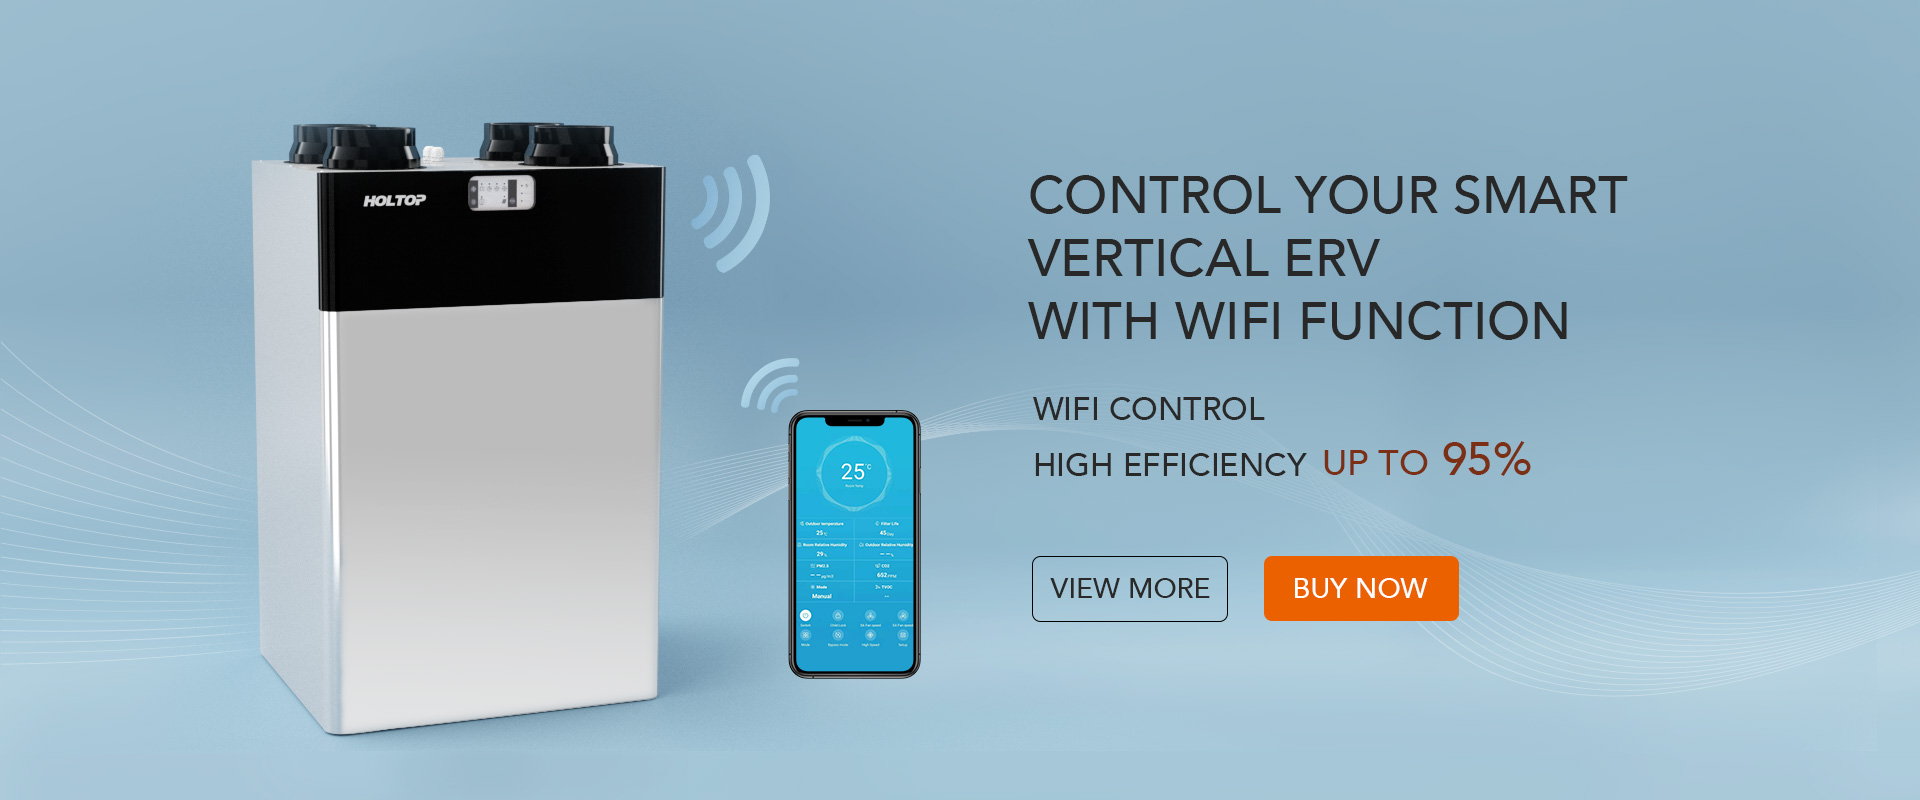 UPGRADED SMART VERTICAL HRV WITH WIFI FUNCTION